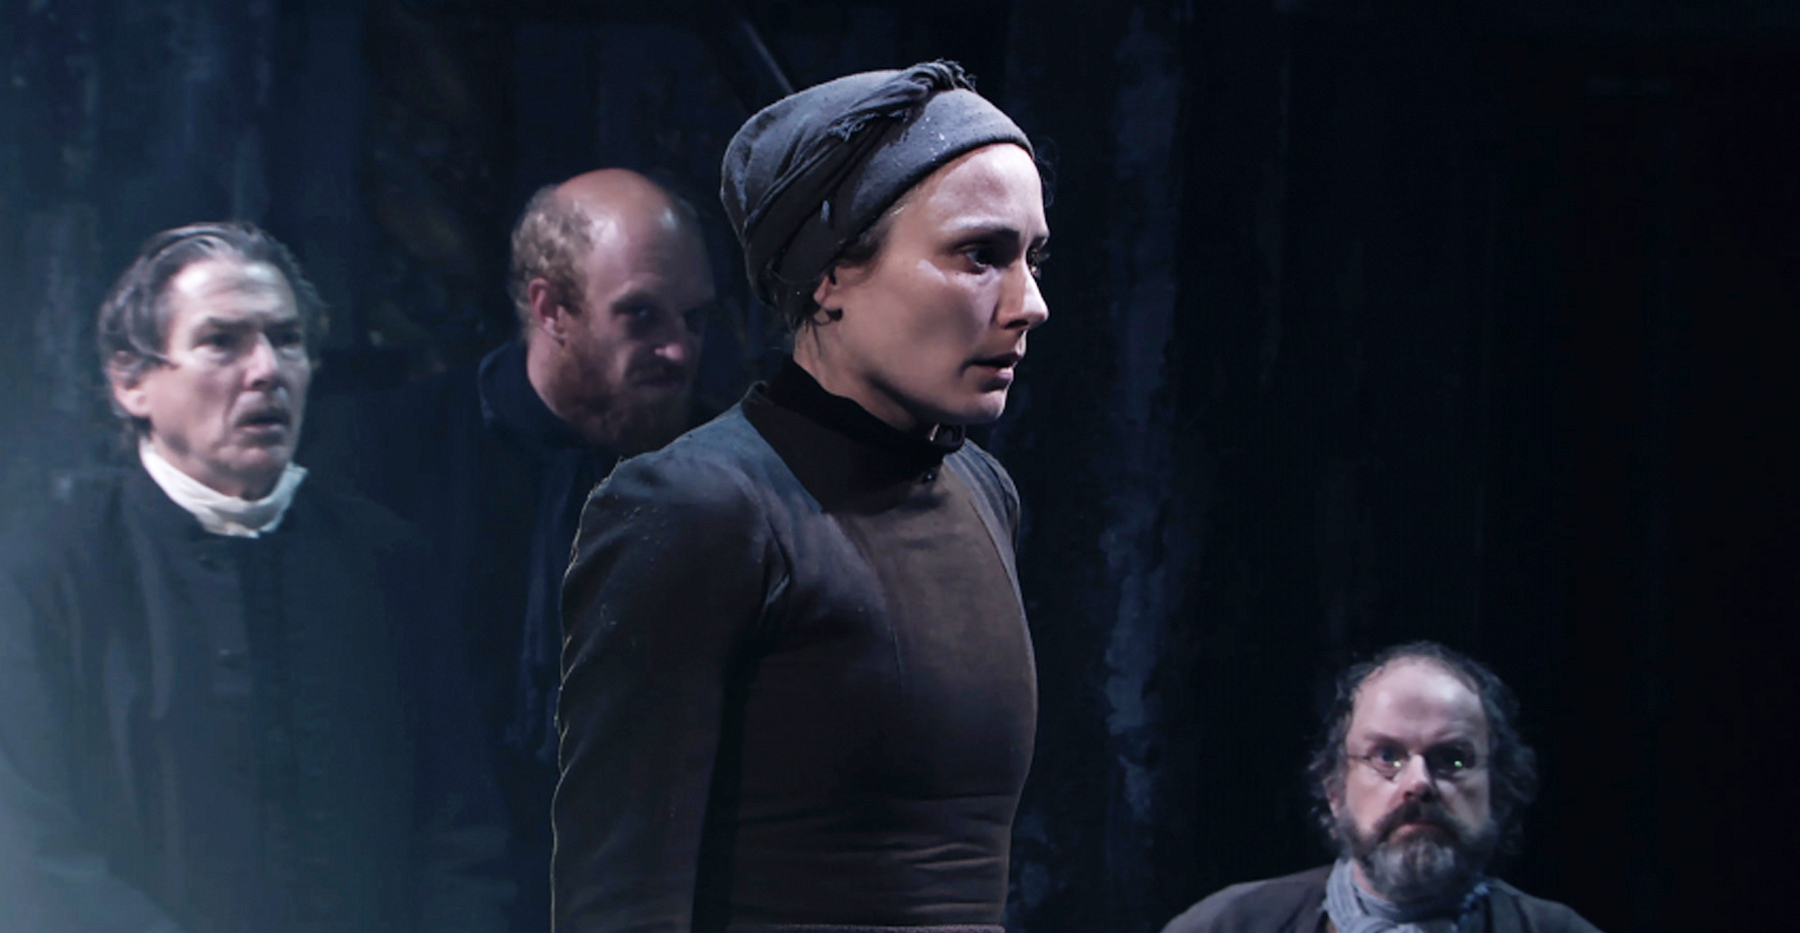 ‘The Crucible’ from the Old Vic Theatre in London premieres March 27 ...